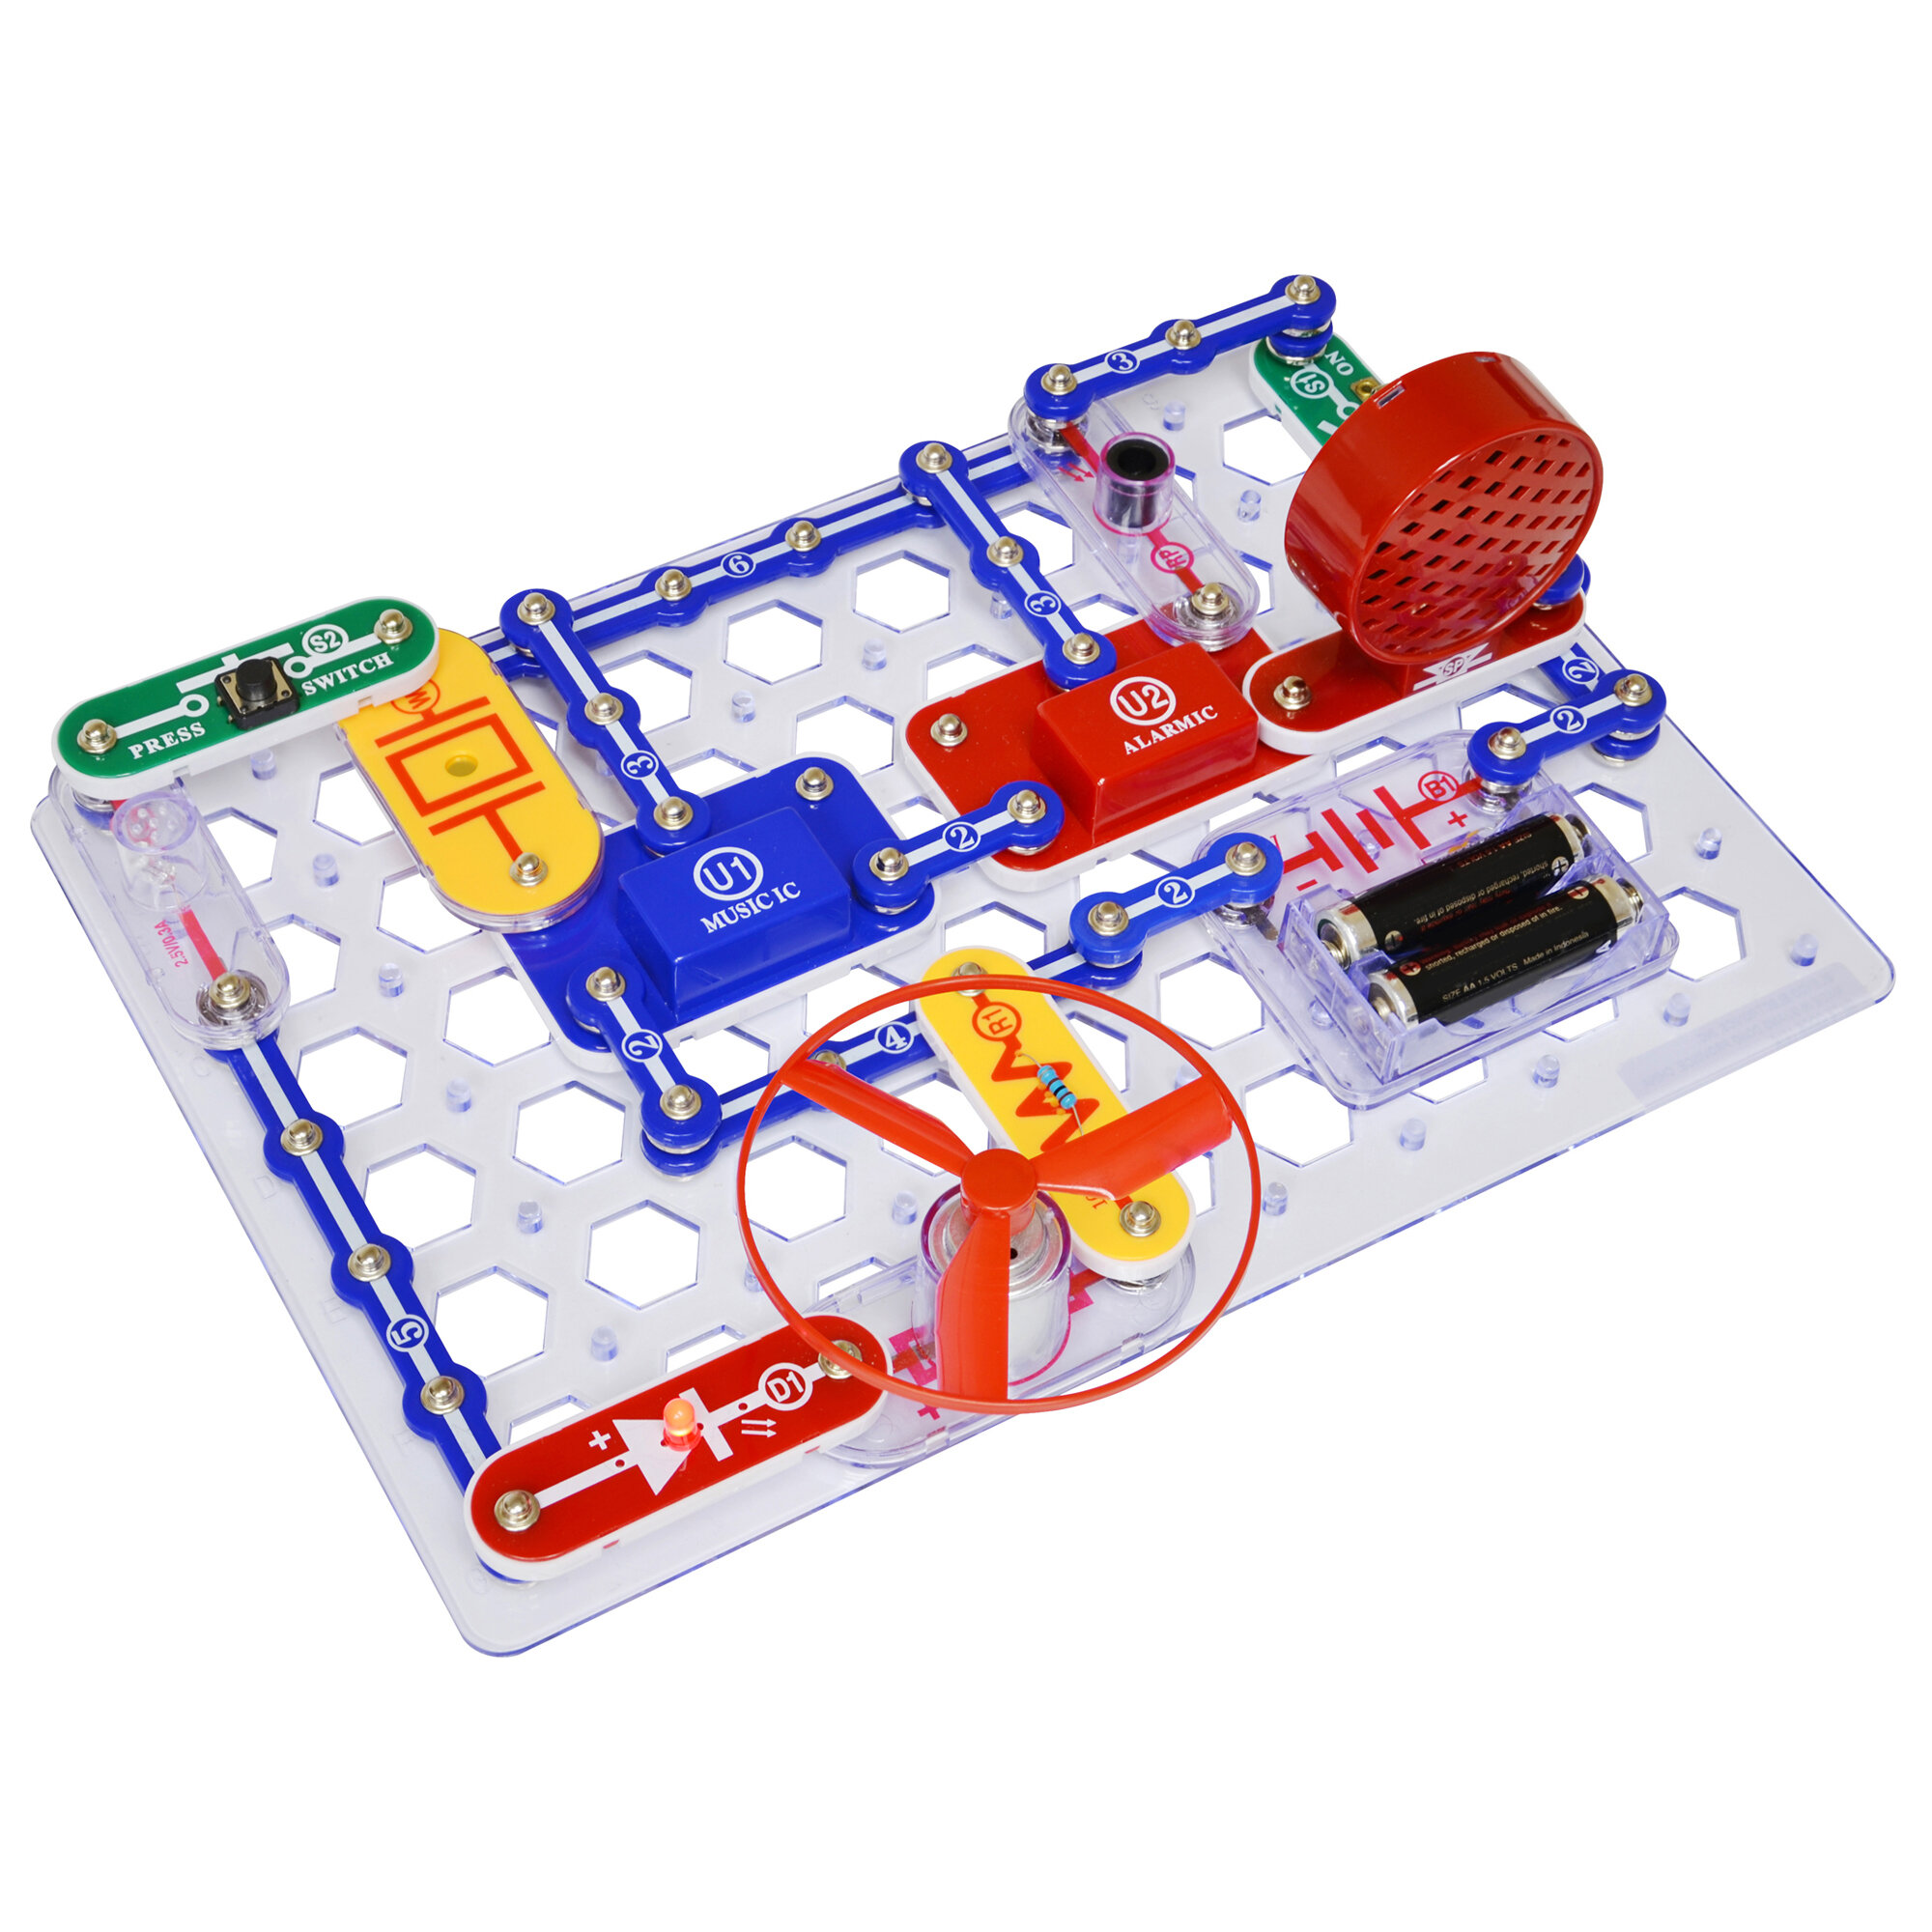 Snap Circuits Jr. SC-100 Electronics Exploration Kit, Over 100 Projects,  Full Color Project Manual, 28 Parts, STEM Educational Toy for Kids 8 + :  Toys & Games 